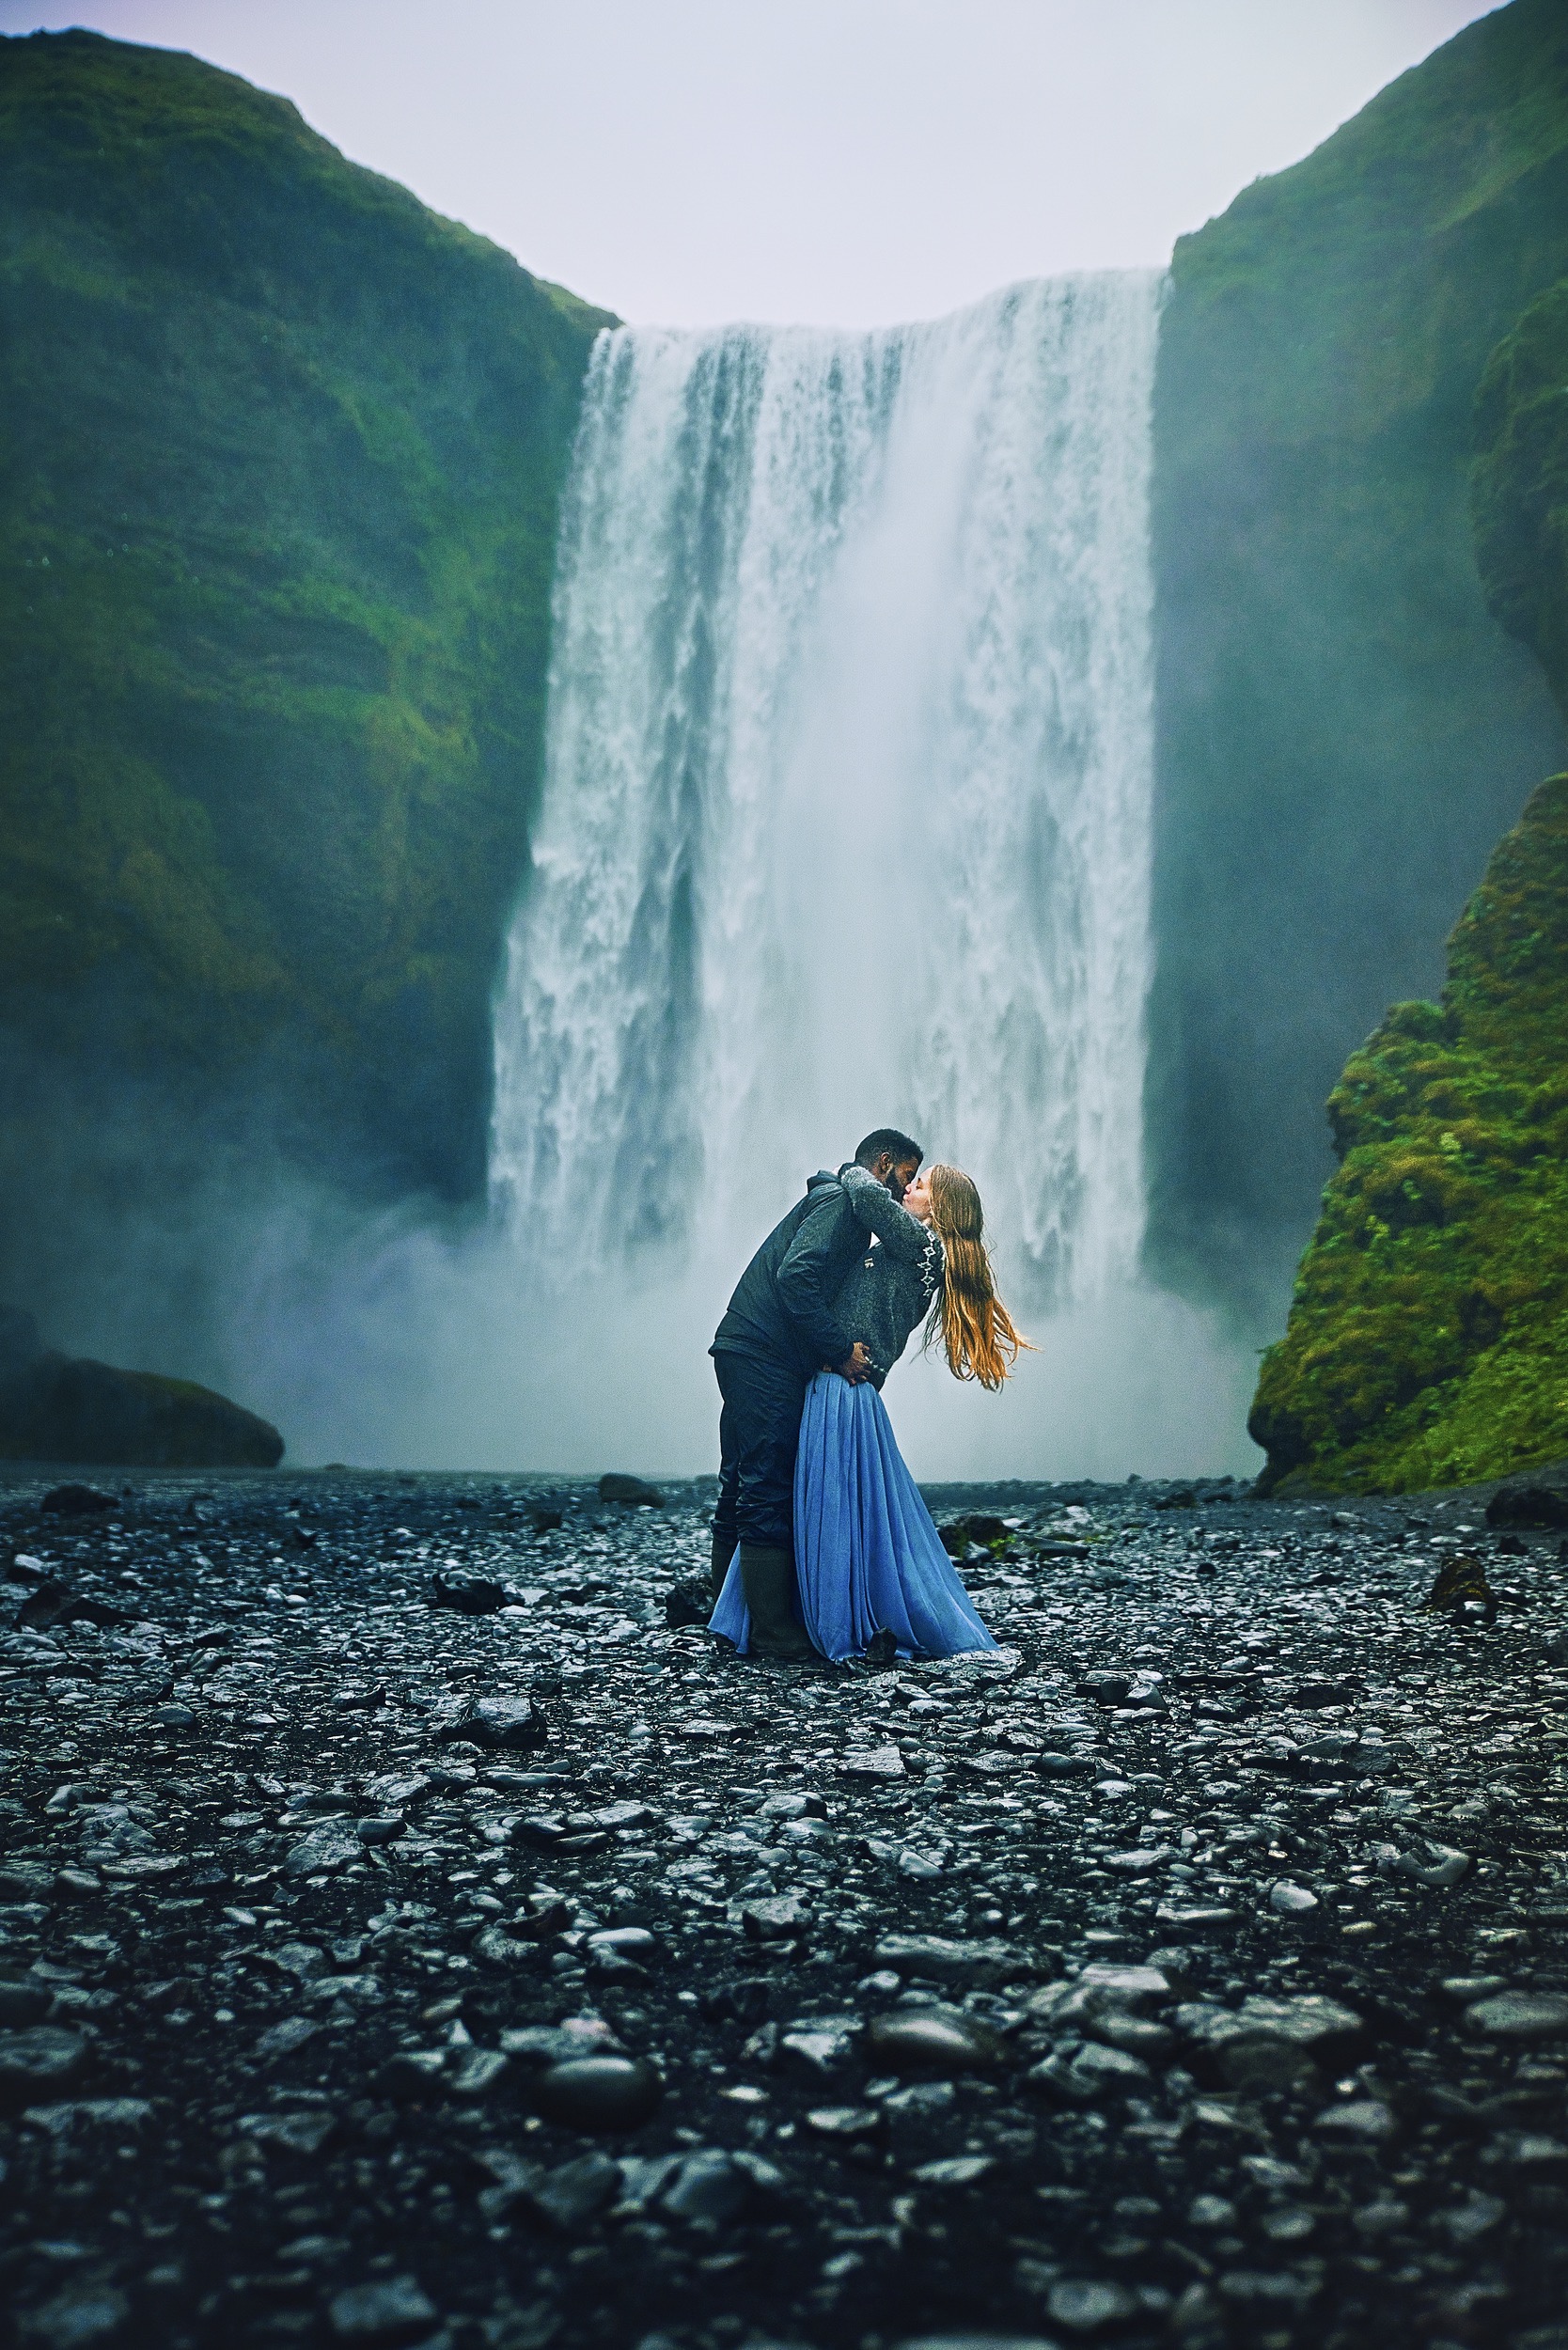 Photo of Terrence and Victoria by a waterfall in Iceland.